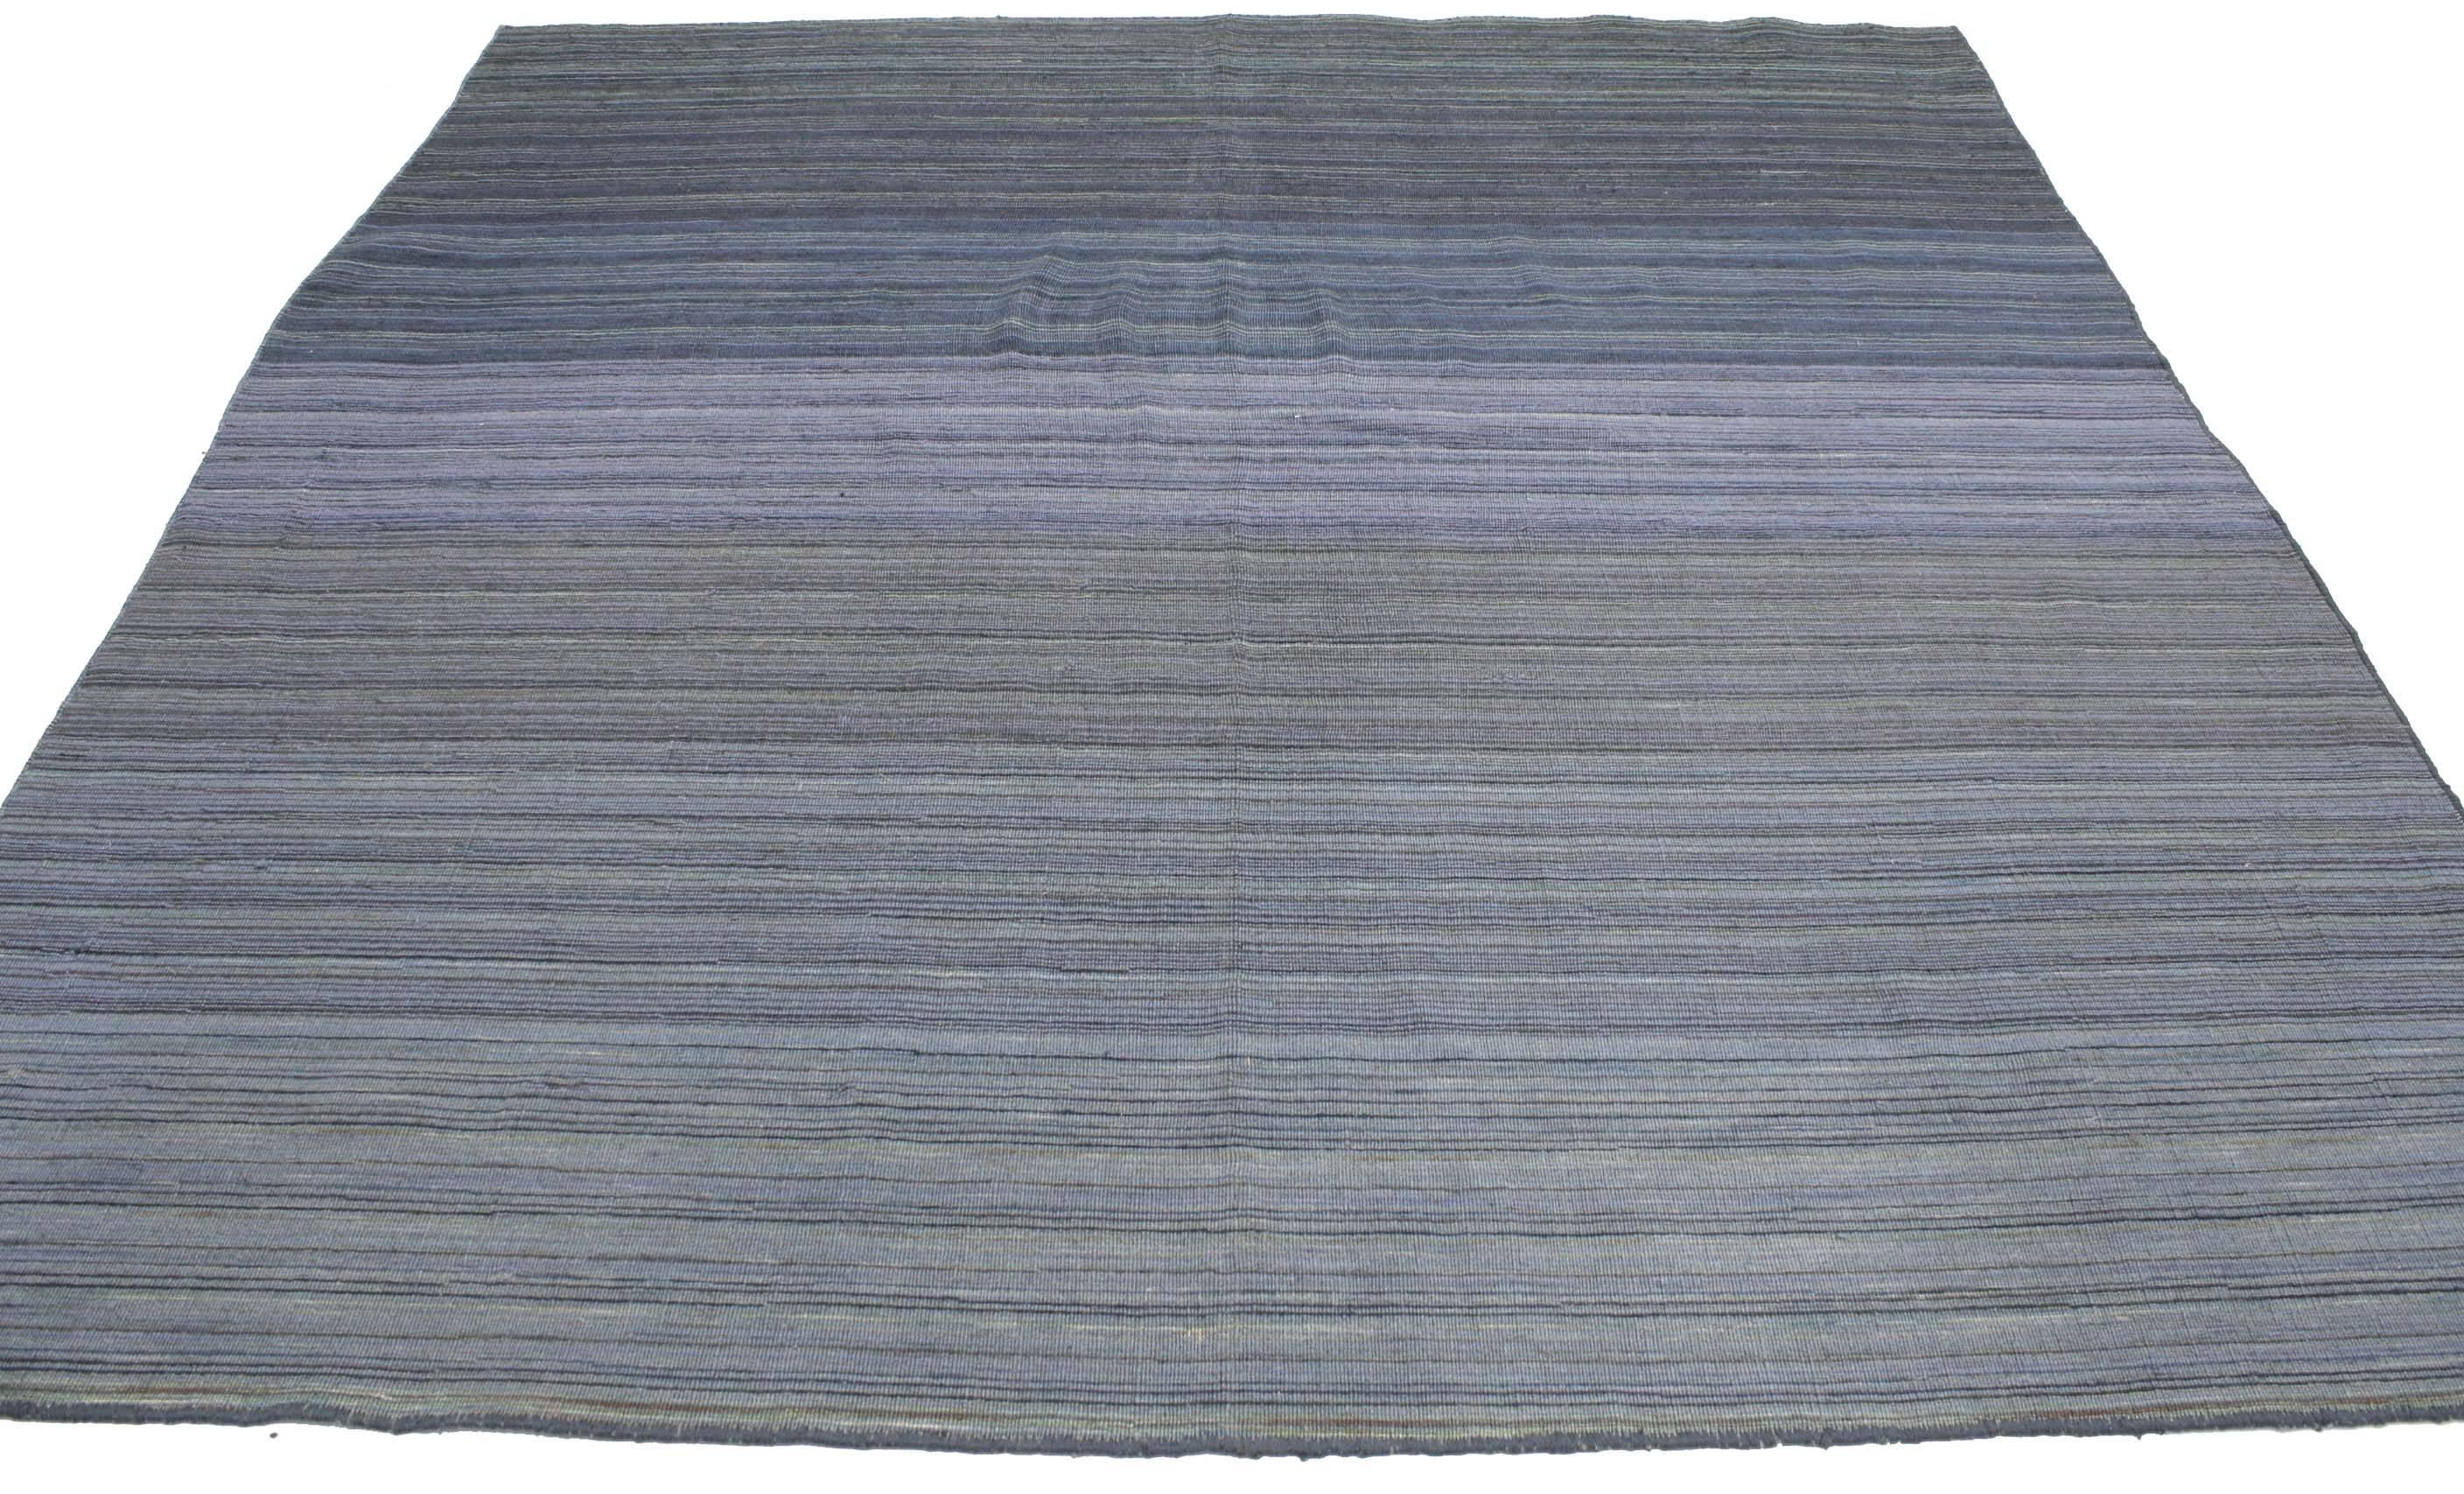 Pakistani New Contemporary Modern Flat-Weave Rug, Ombre Kilim Rug